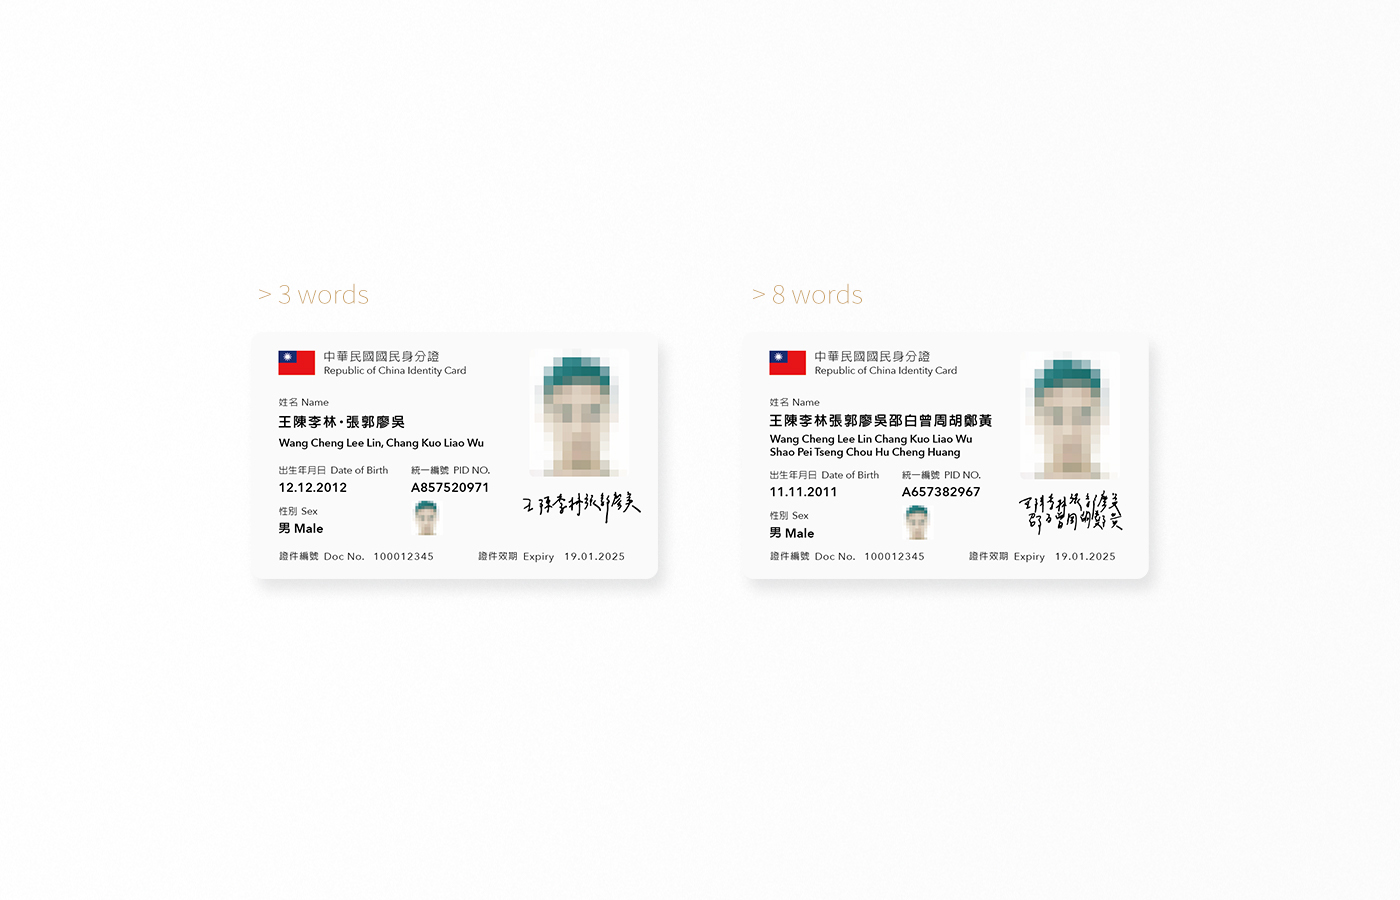 id card typography   redesign taiwan retypography identity name nation card Government